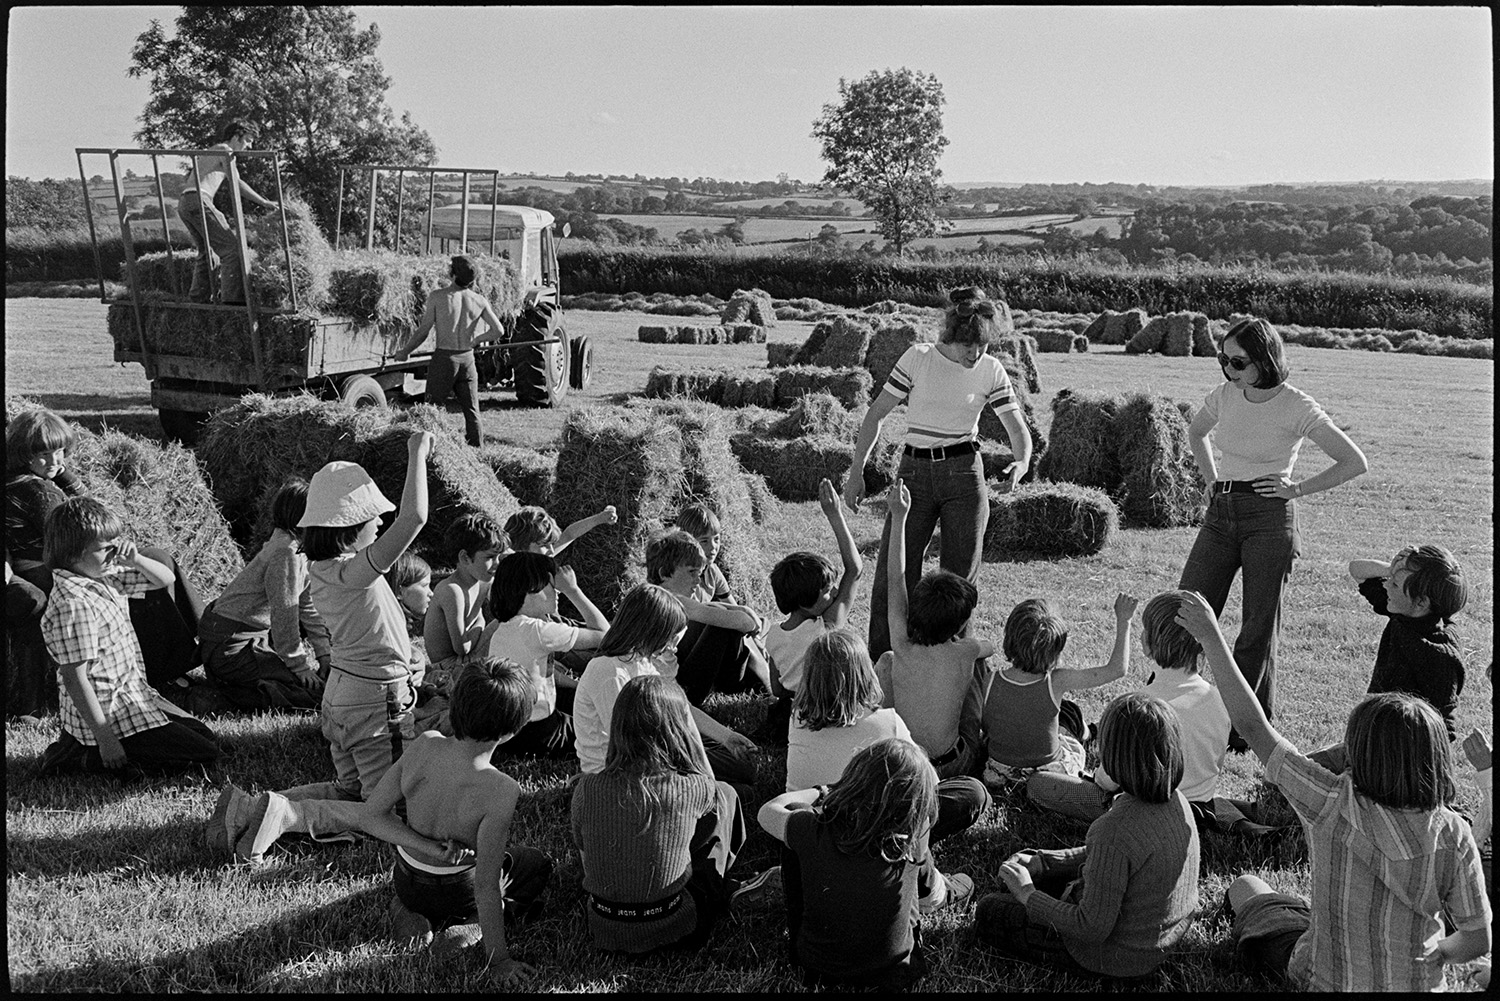 Children watching and helping farmer bale hay. 
[Children sat in a field at Parsonage, Iddesleigh, answering questions from their teachers at the Farms for City Children initiative. In the background two men are loading hay bales onto a tractor and trailer.]